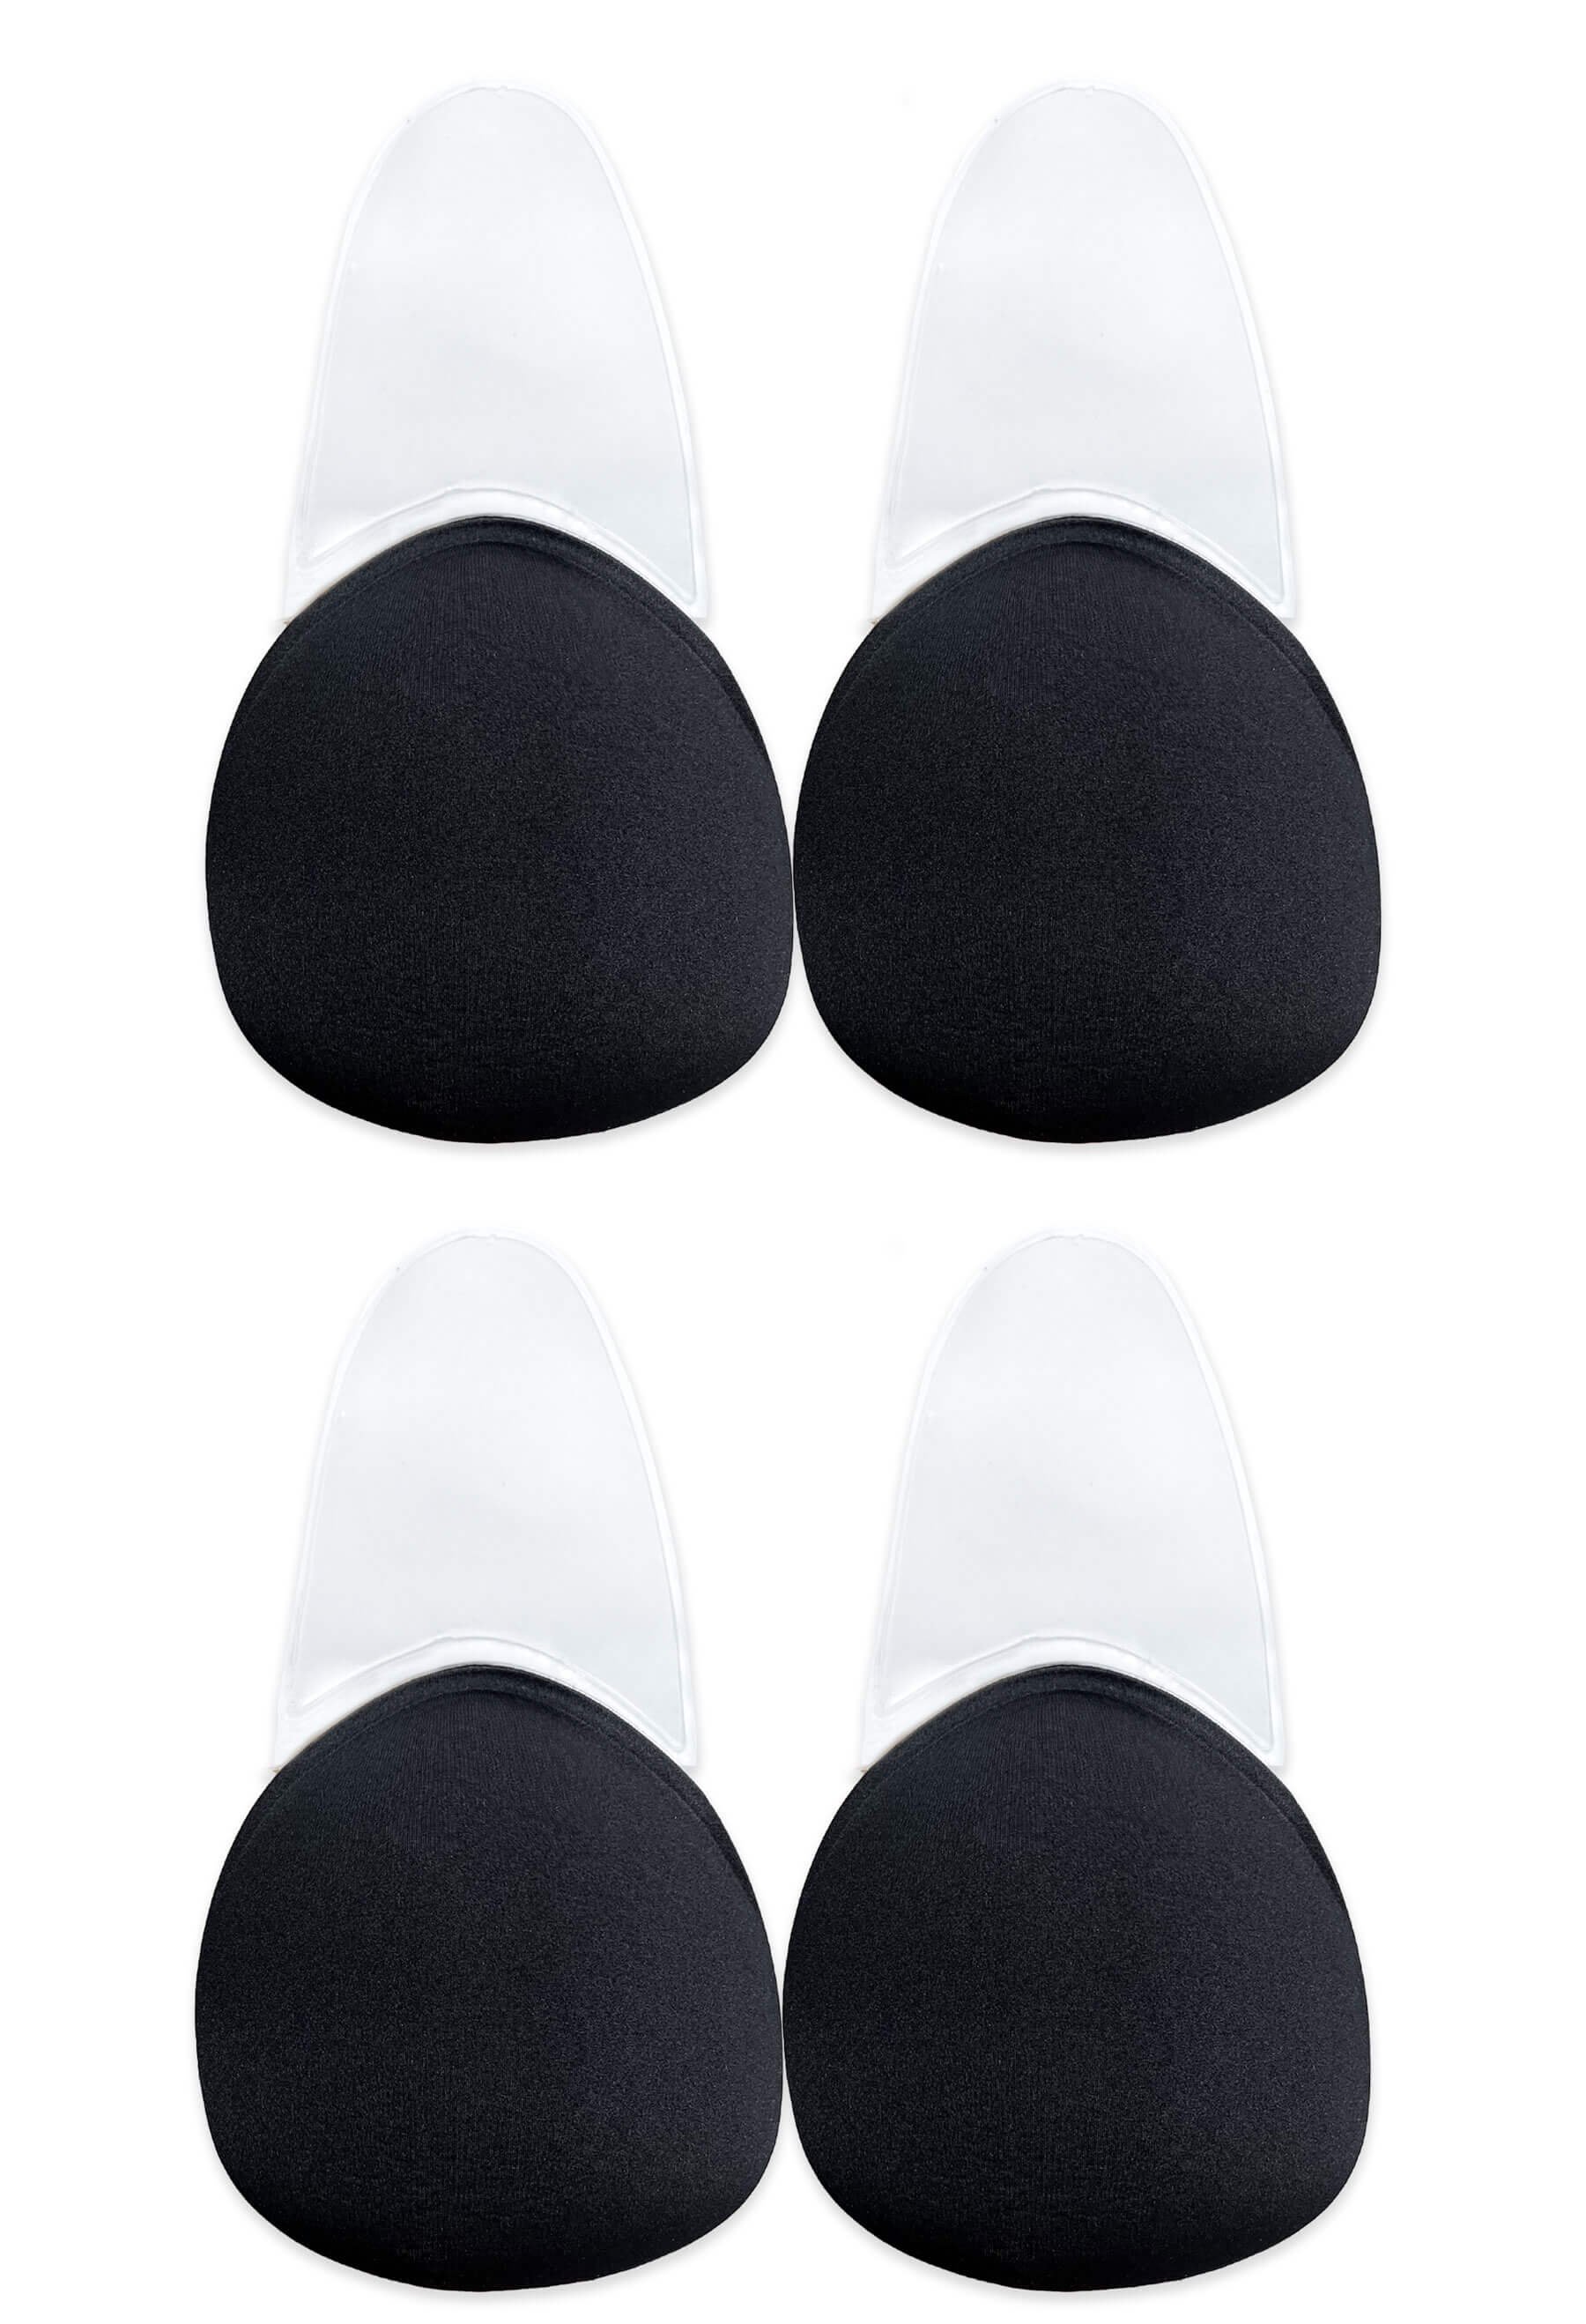 Adhesive Breast Lift Cups - 2 Pack